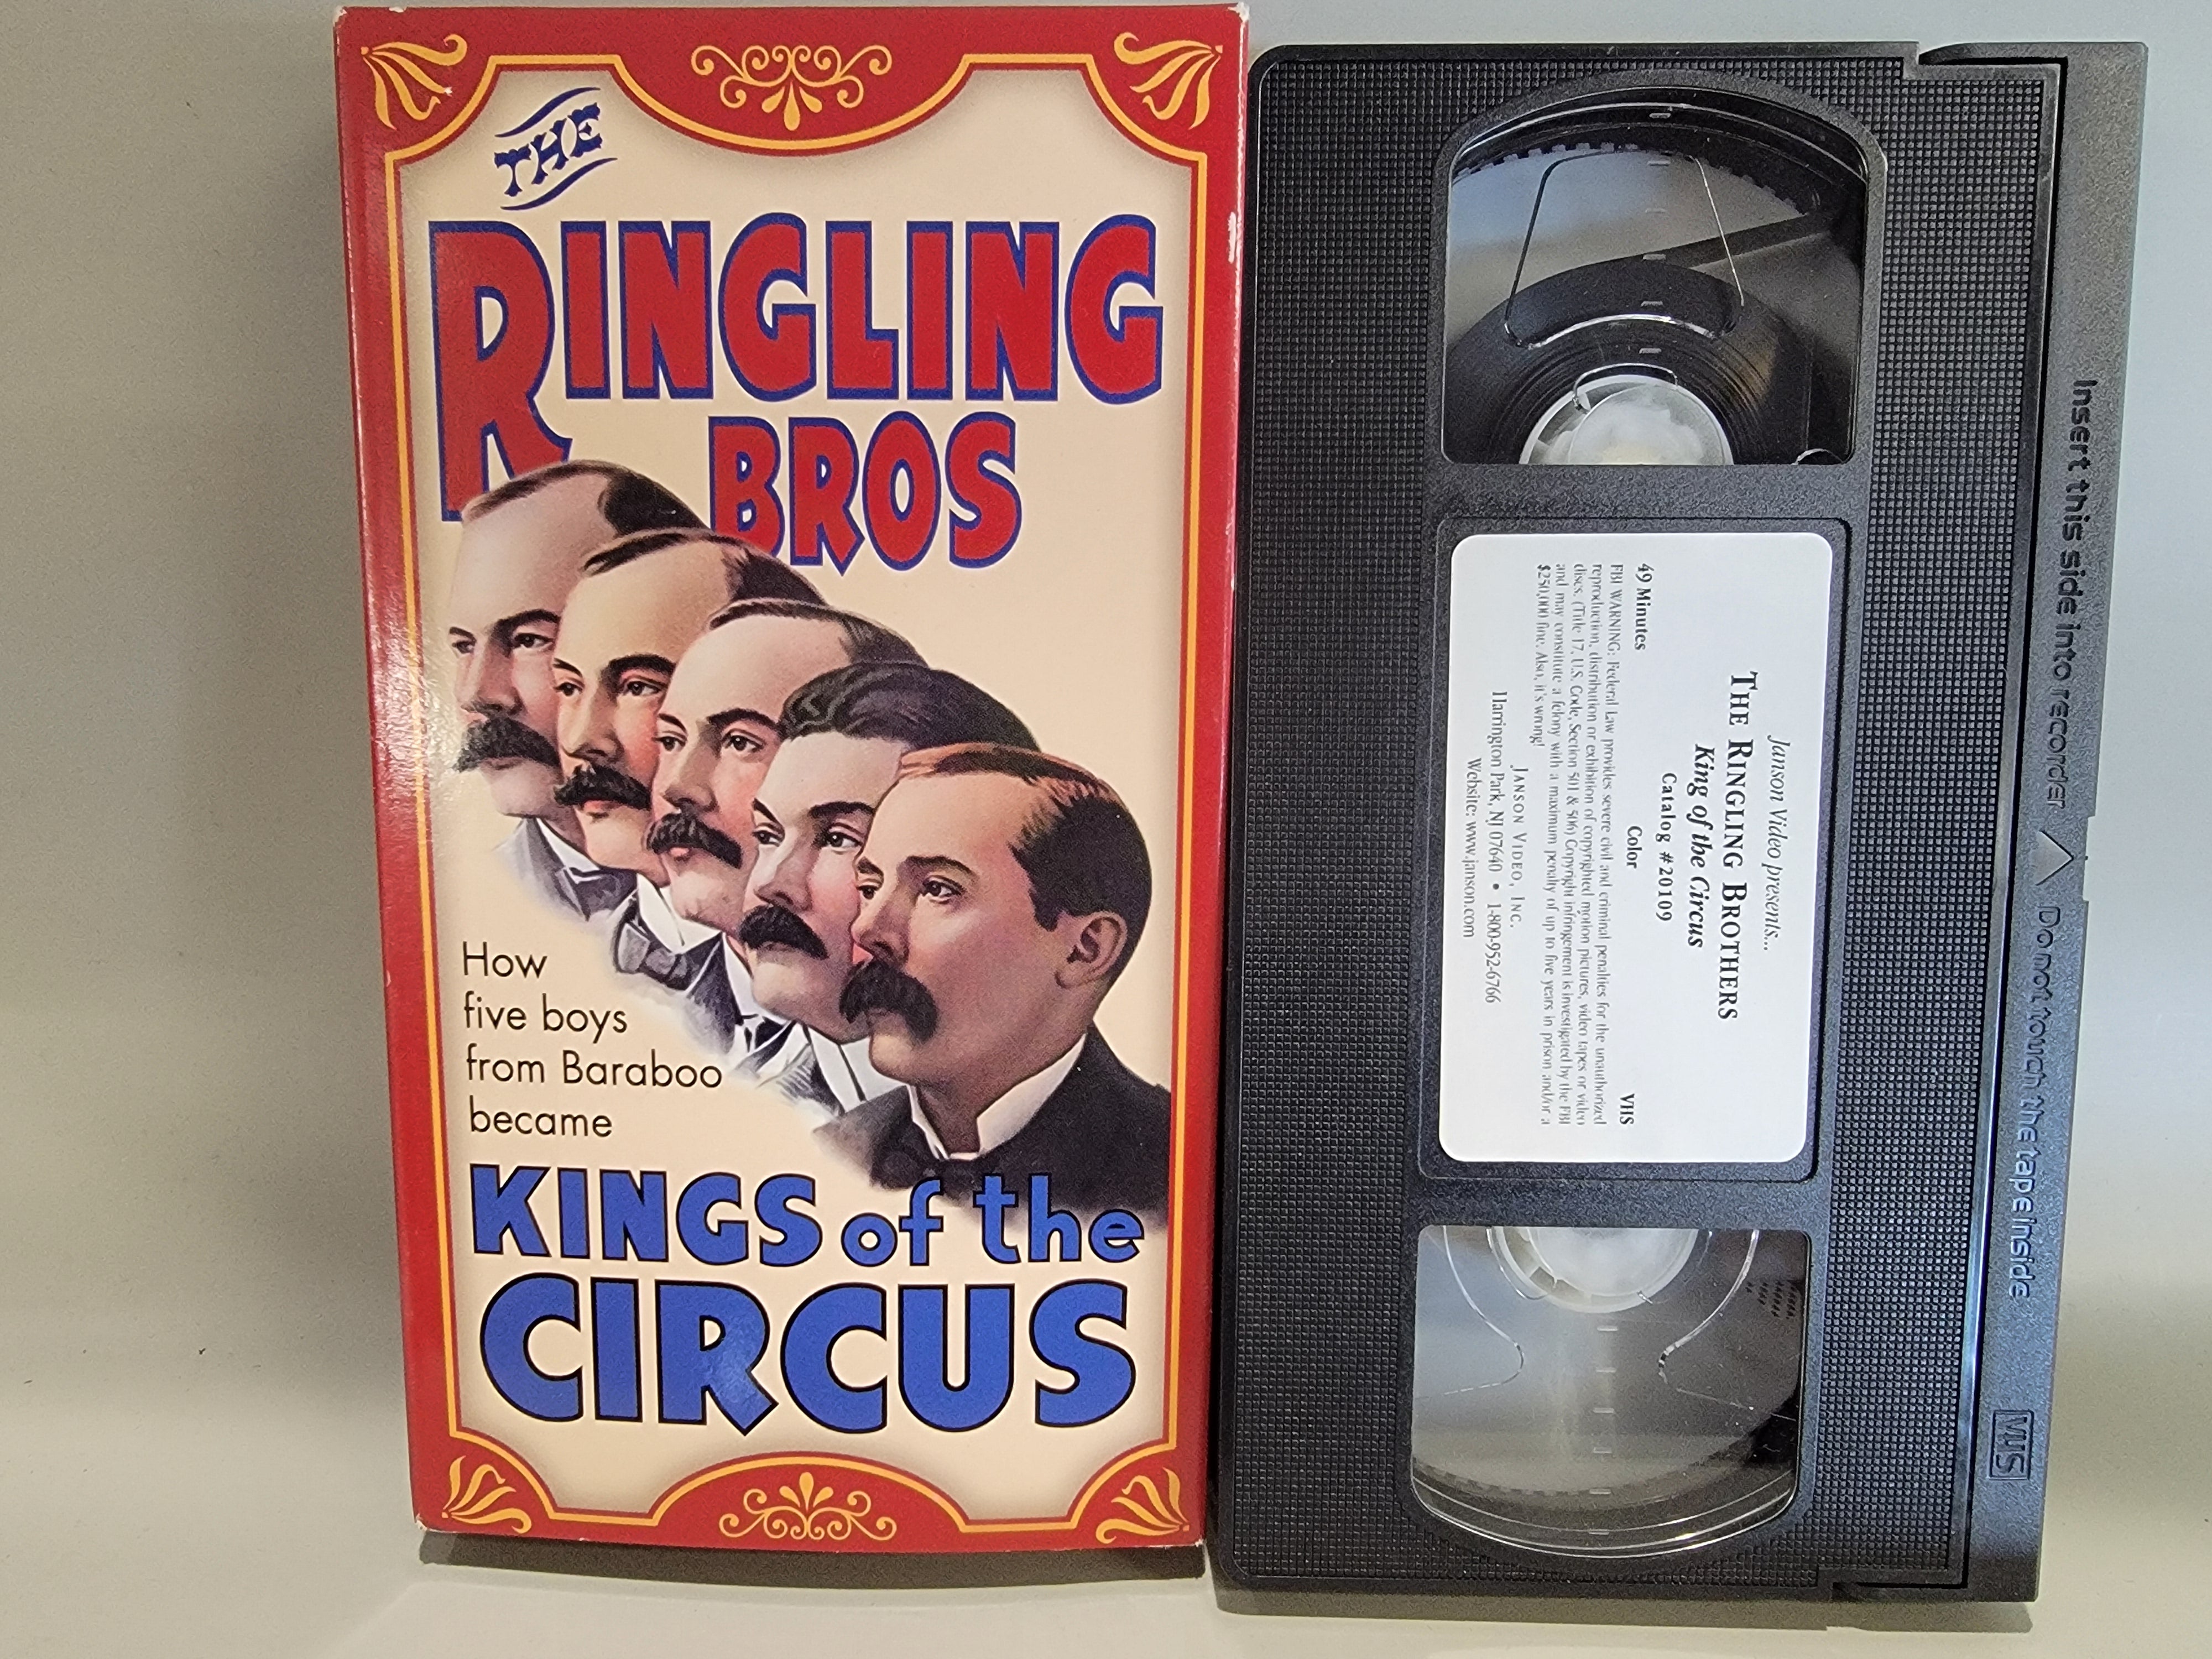 THE RINGLING BROS: KINGS OF THE CIRCUS VHS [USED]